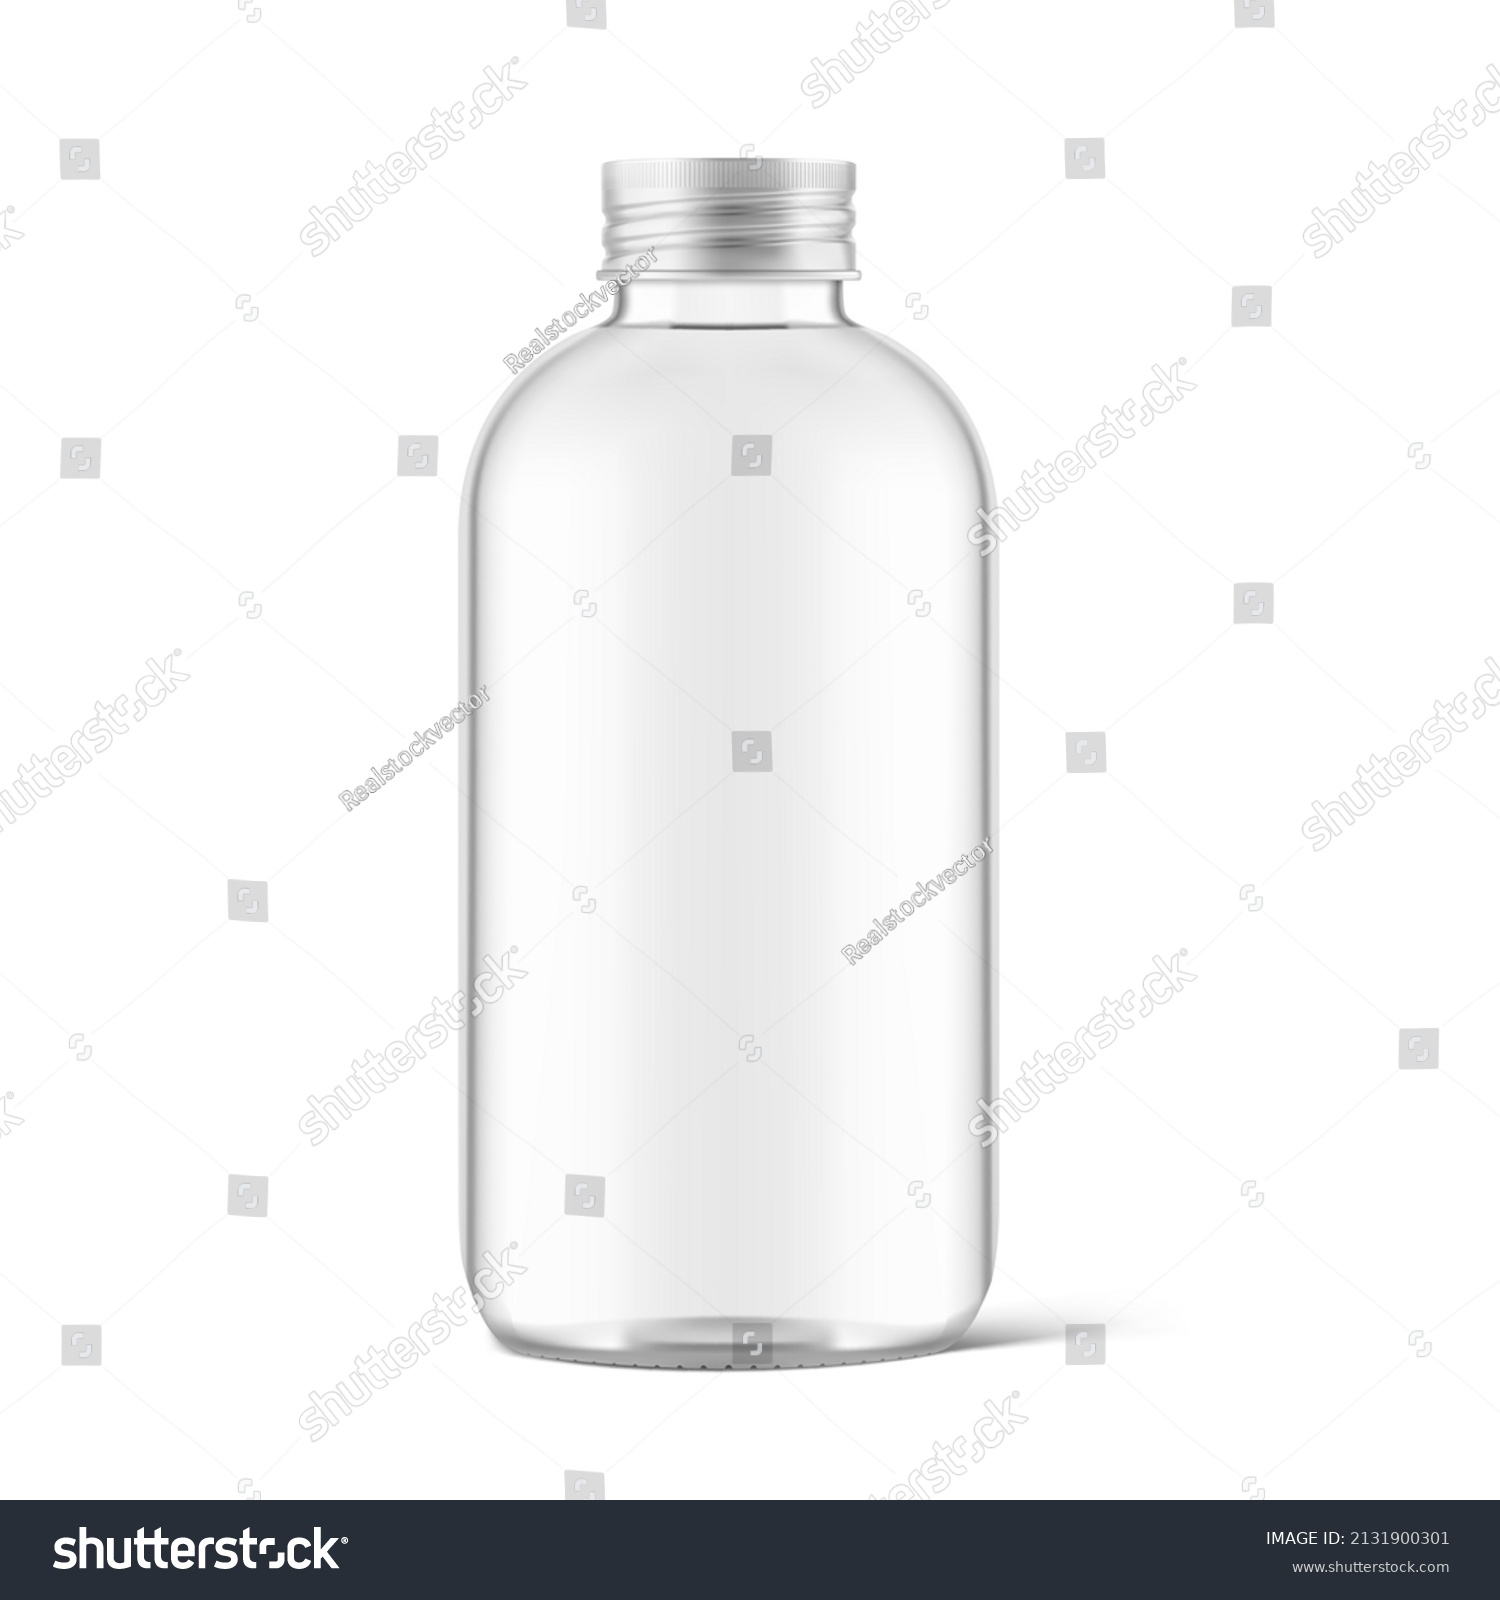 SVG of Glass bottle with screw cap mockup. Can be used for medical, cosmetic, food. Vector illustration isolated on white background. EPS10.	 svg